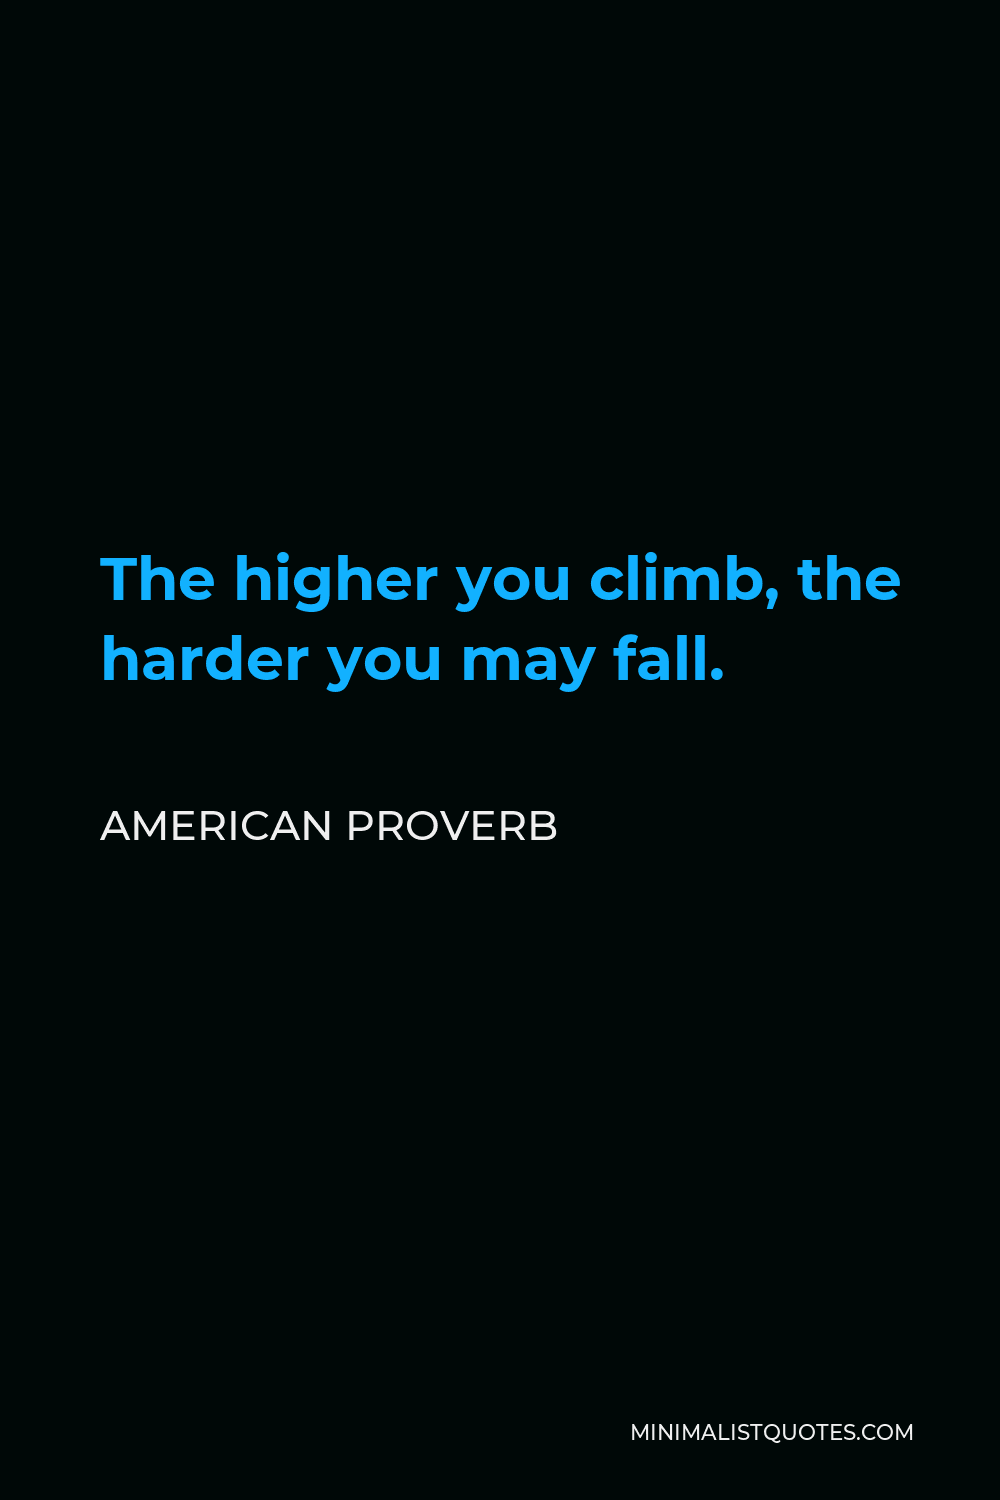 American Proverb Quote - The higher you climb, the harder you may fall.